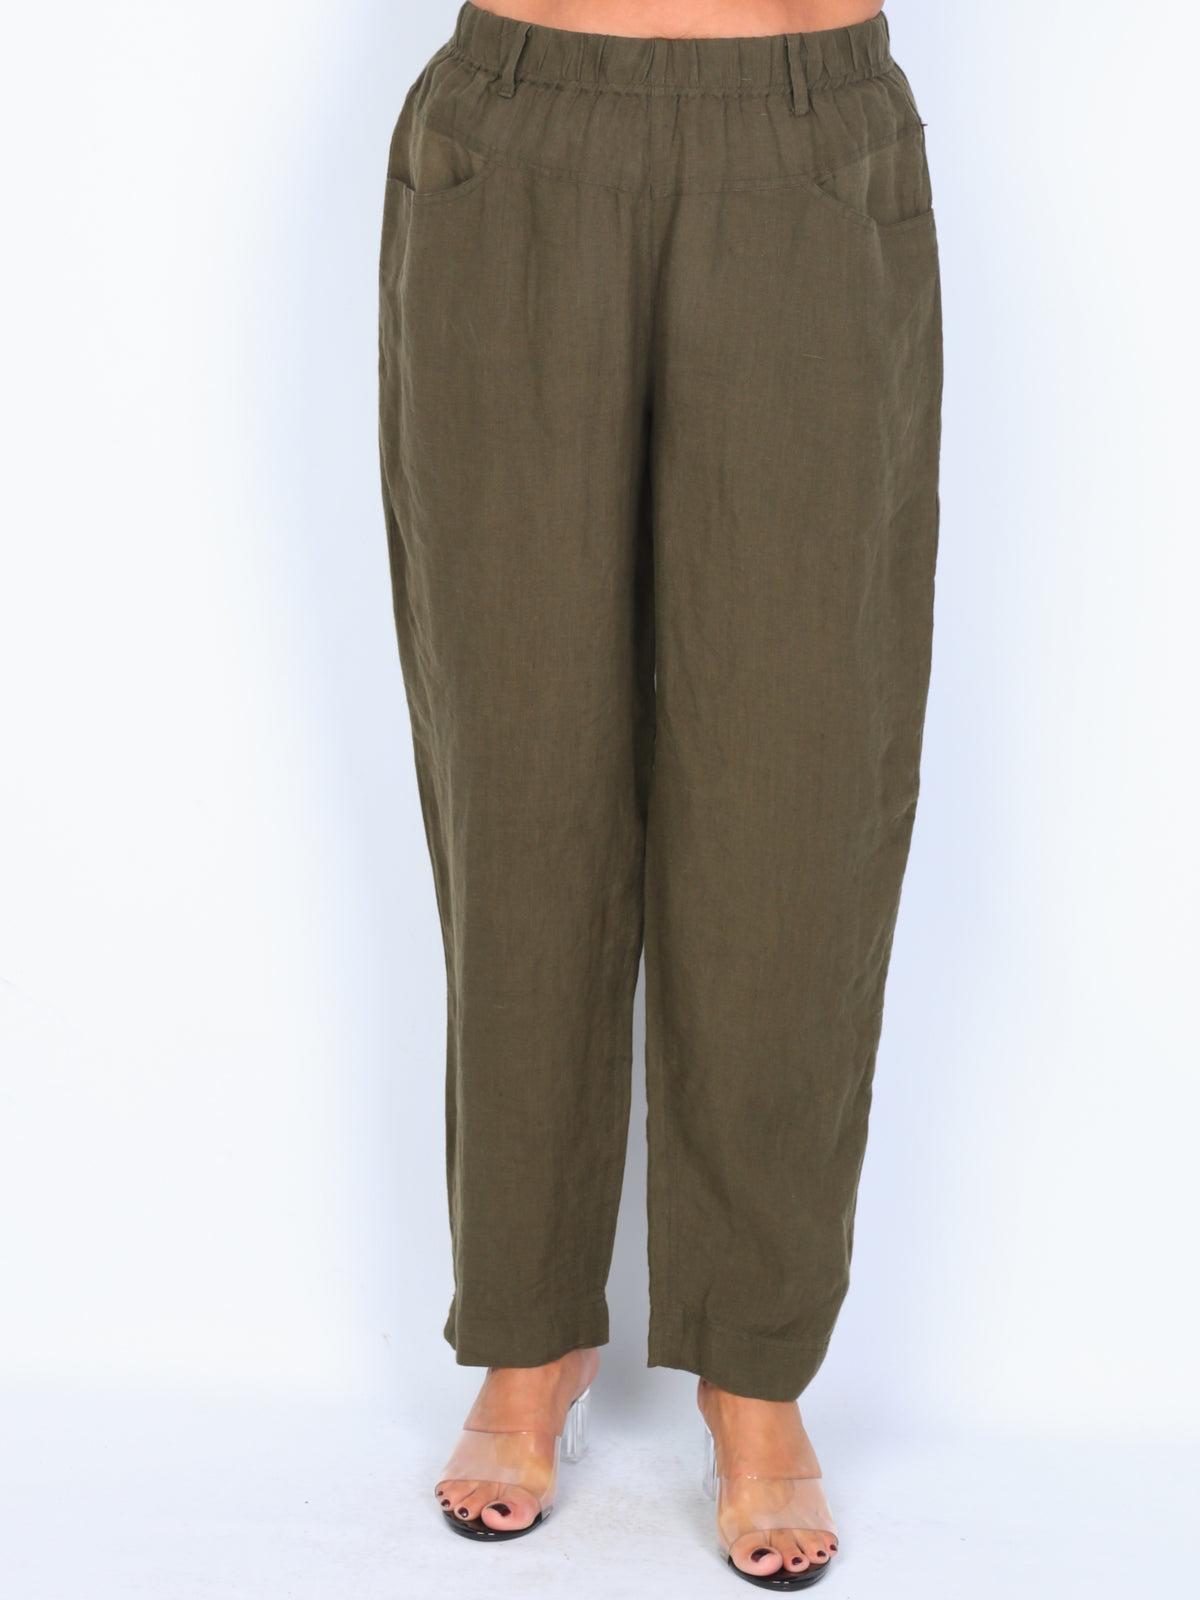 Some linen trousers with pockets